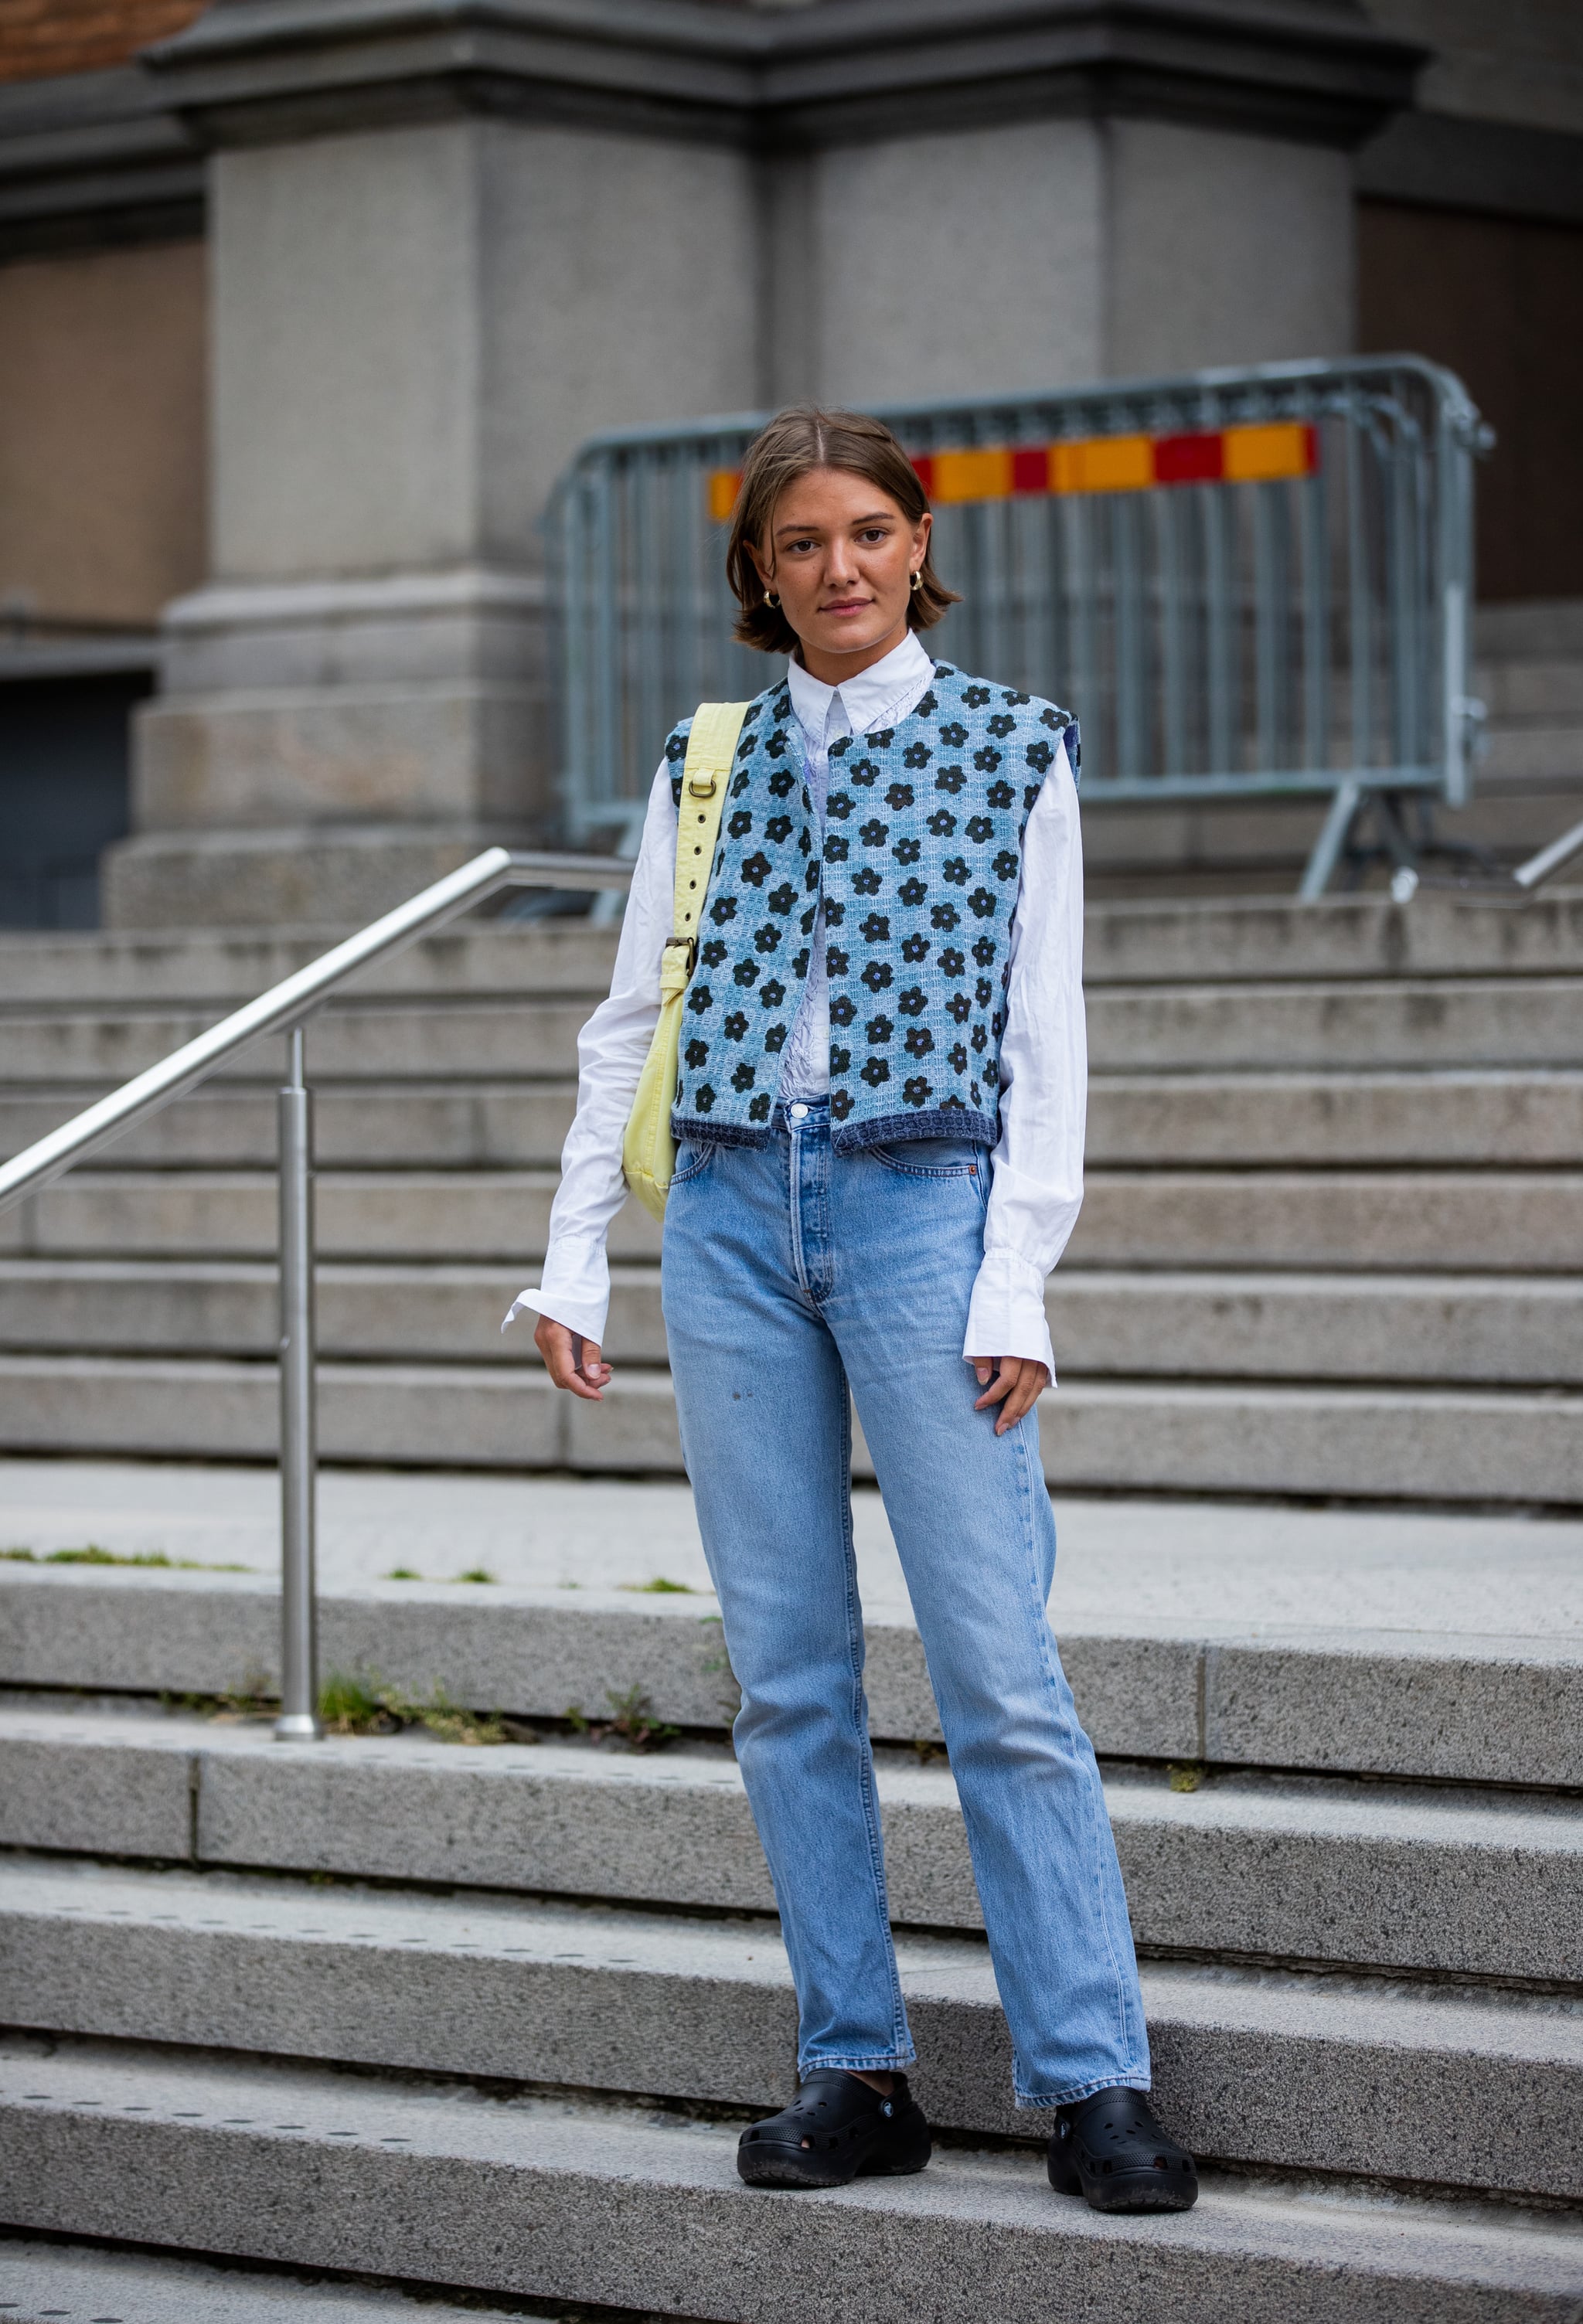 Outfit idea: Wear your Crocs with straight-leg jeans and a quirky | 16  Great Fall Outfit Ideas to Try From Copenhagen Fashion Week | POPSUGAR  Fashion Photo 12